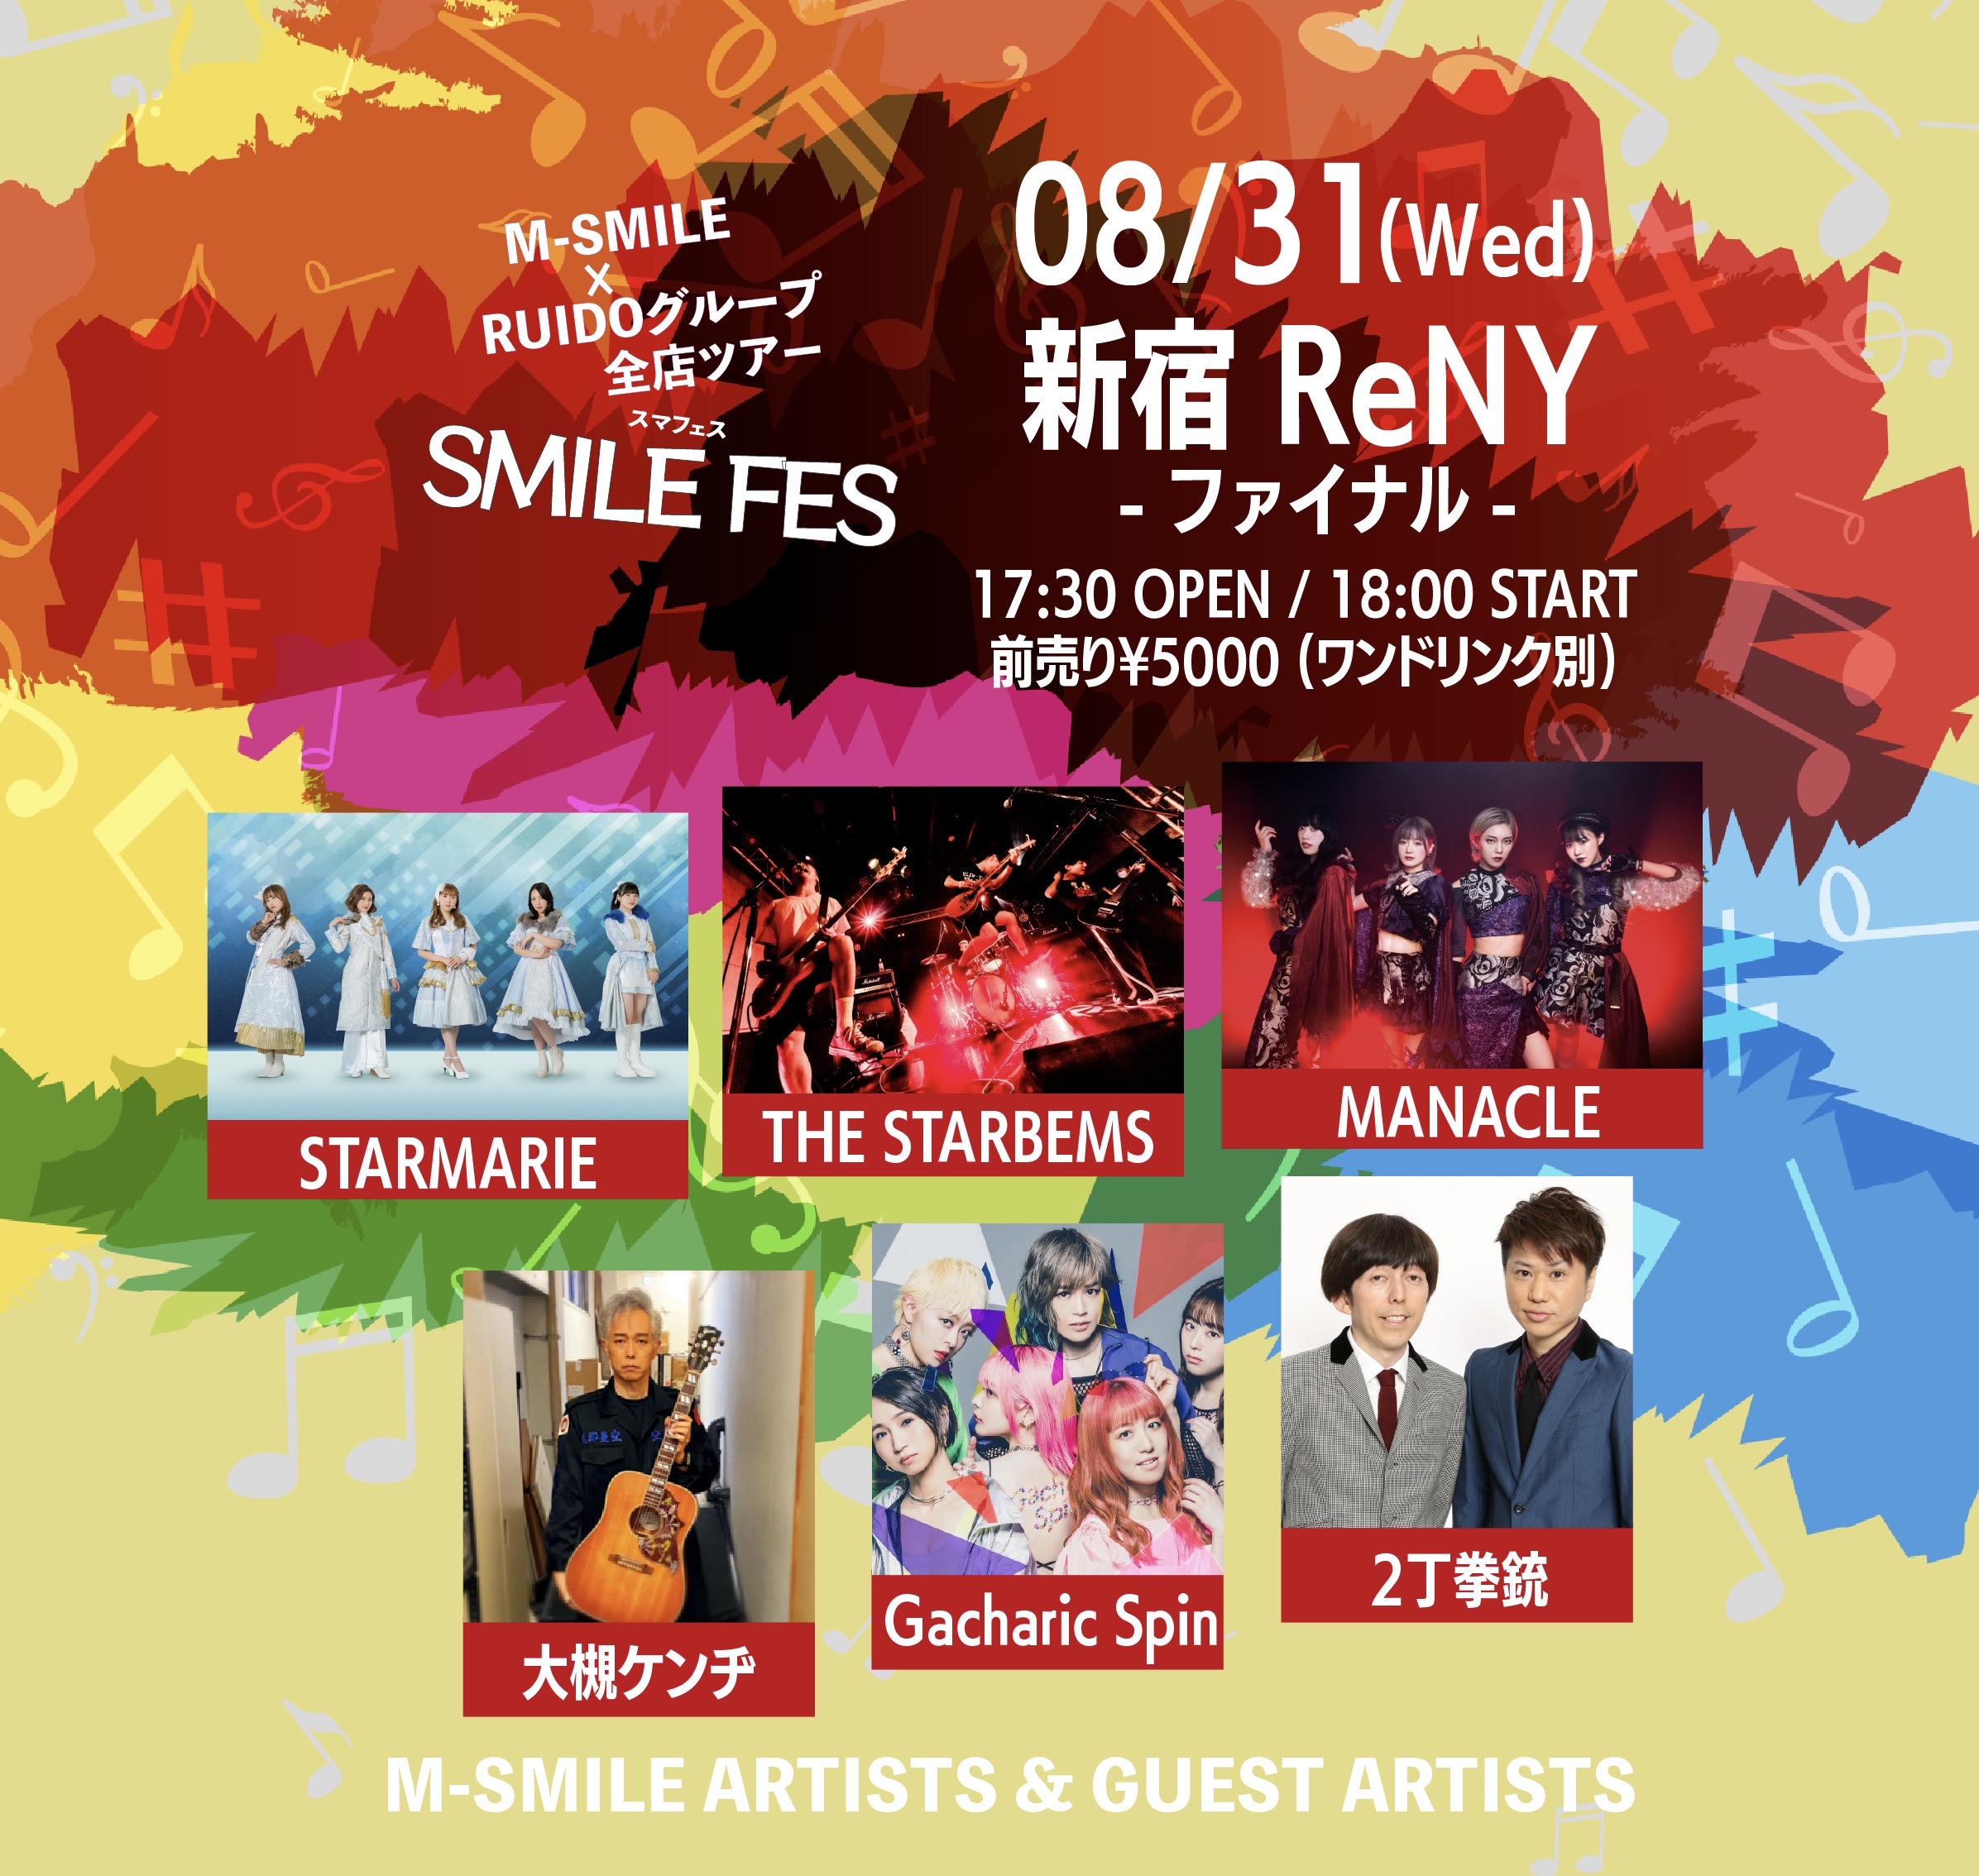 8/31 M-SMILE × RUIDO全店ツアー スマフェス【新宿ReNY(ファイナル)】